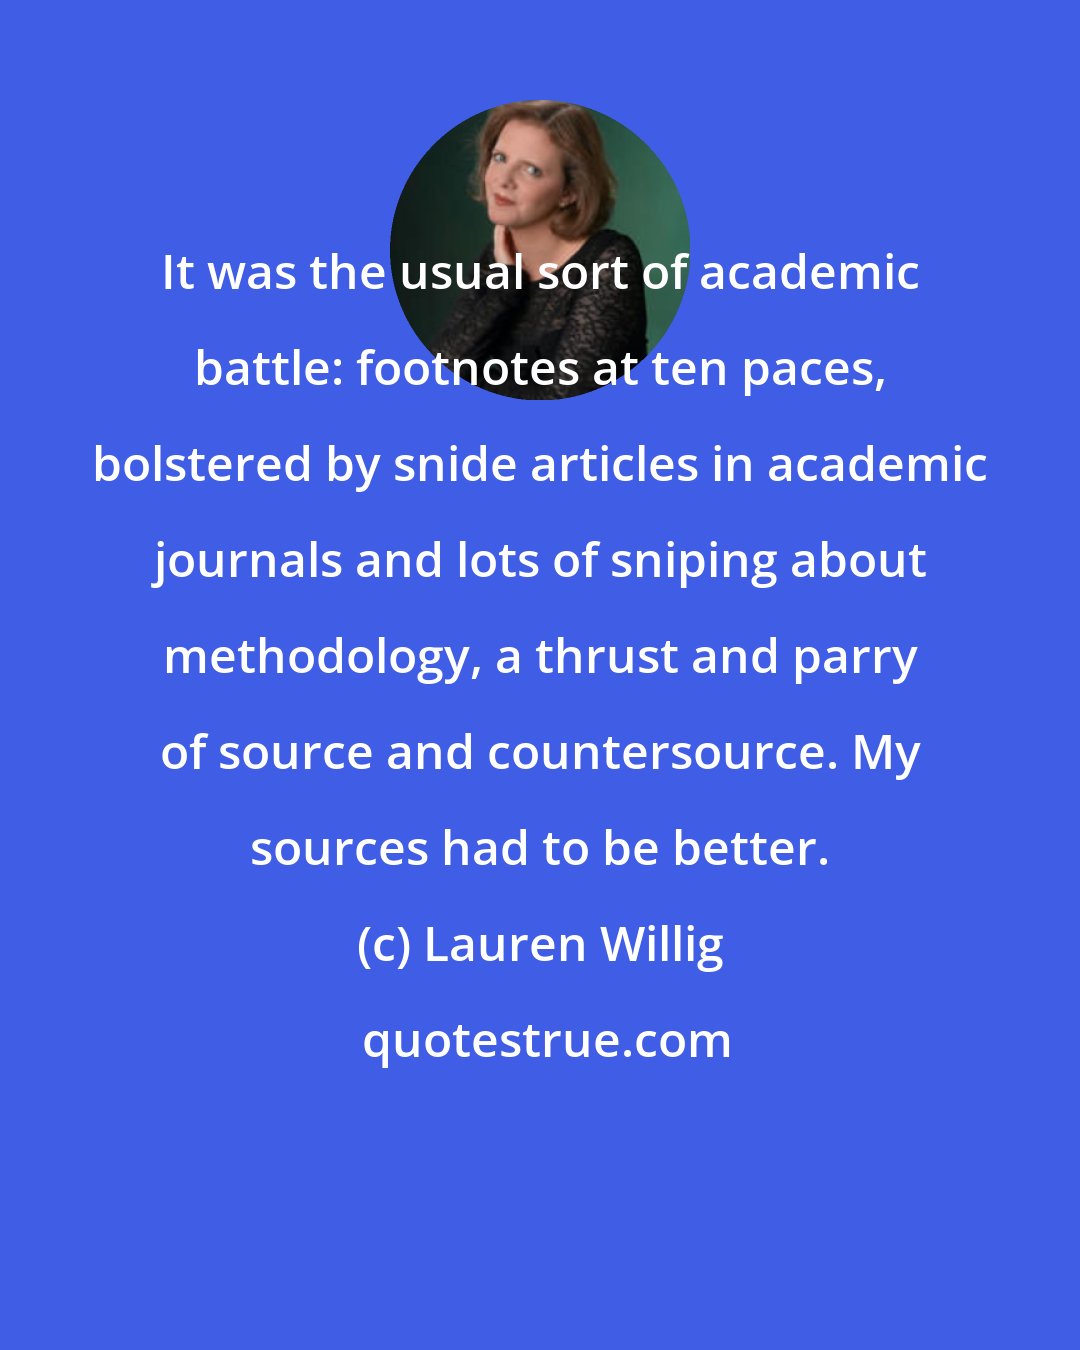 Lauren Willig: It was the usual sort of academic battle: footnotes at ten paces, bolstered by snide articles in academic journals and lots of sniping about methodology, a thrust and parry of source and countersource. My sources had to be better.